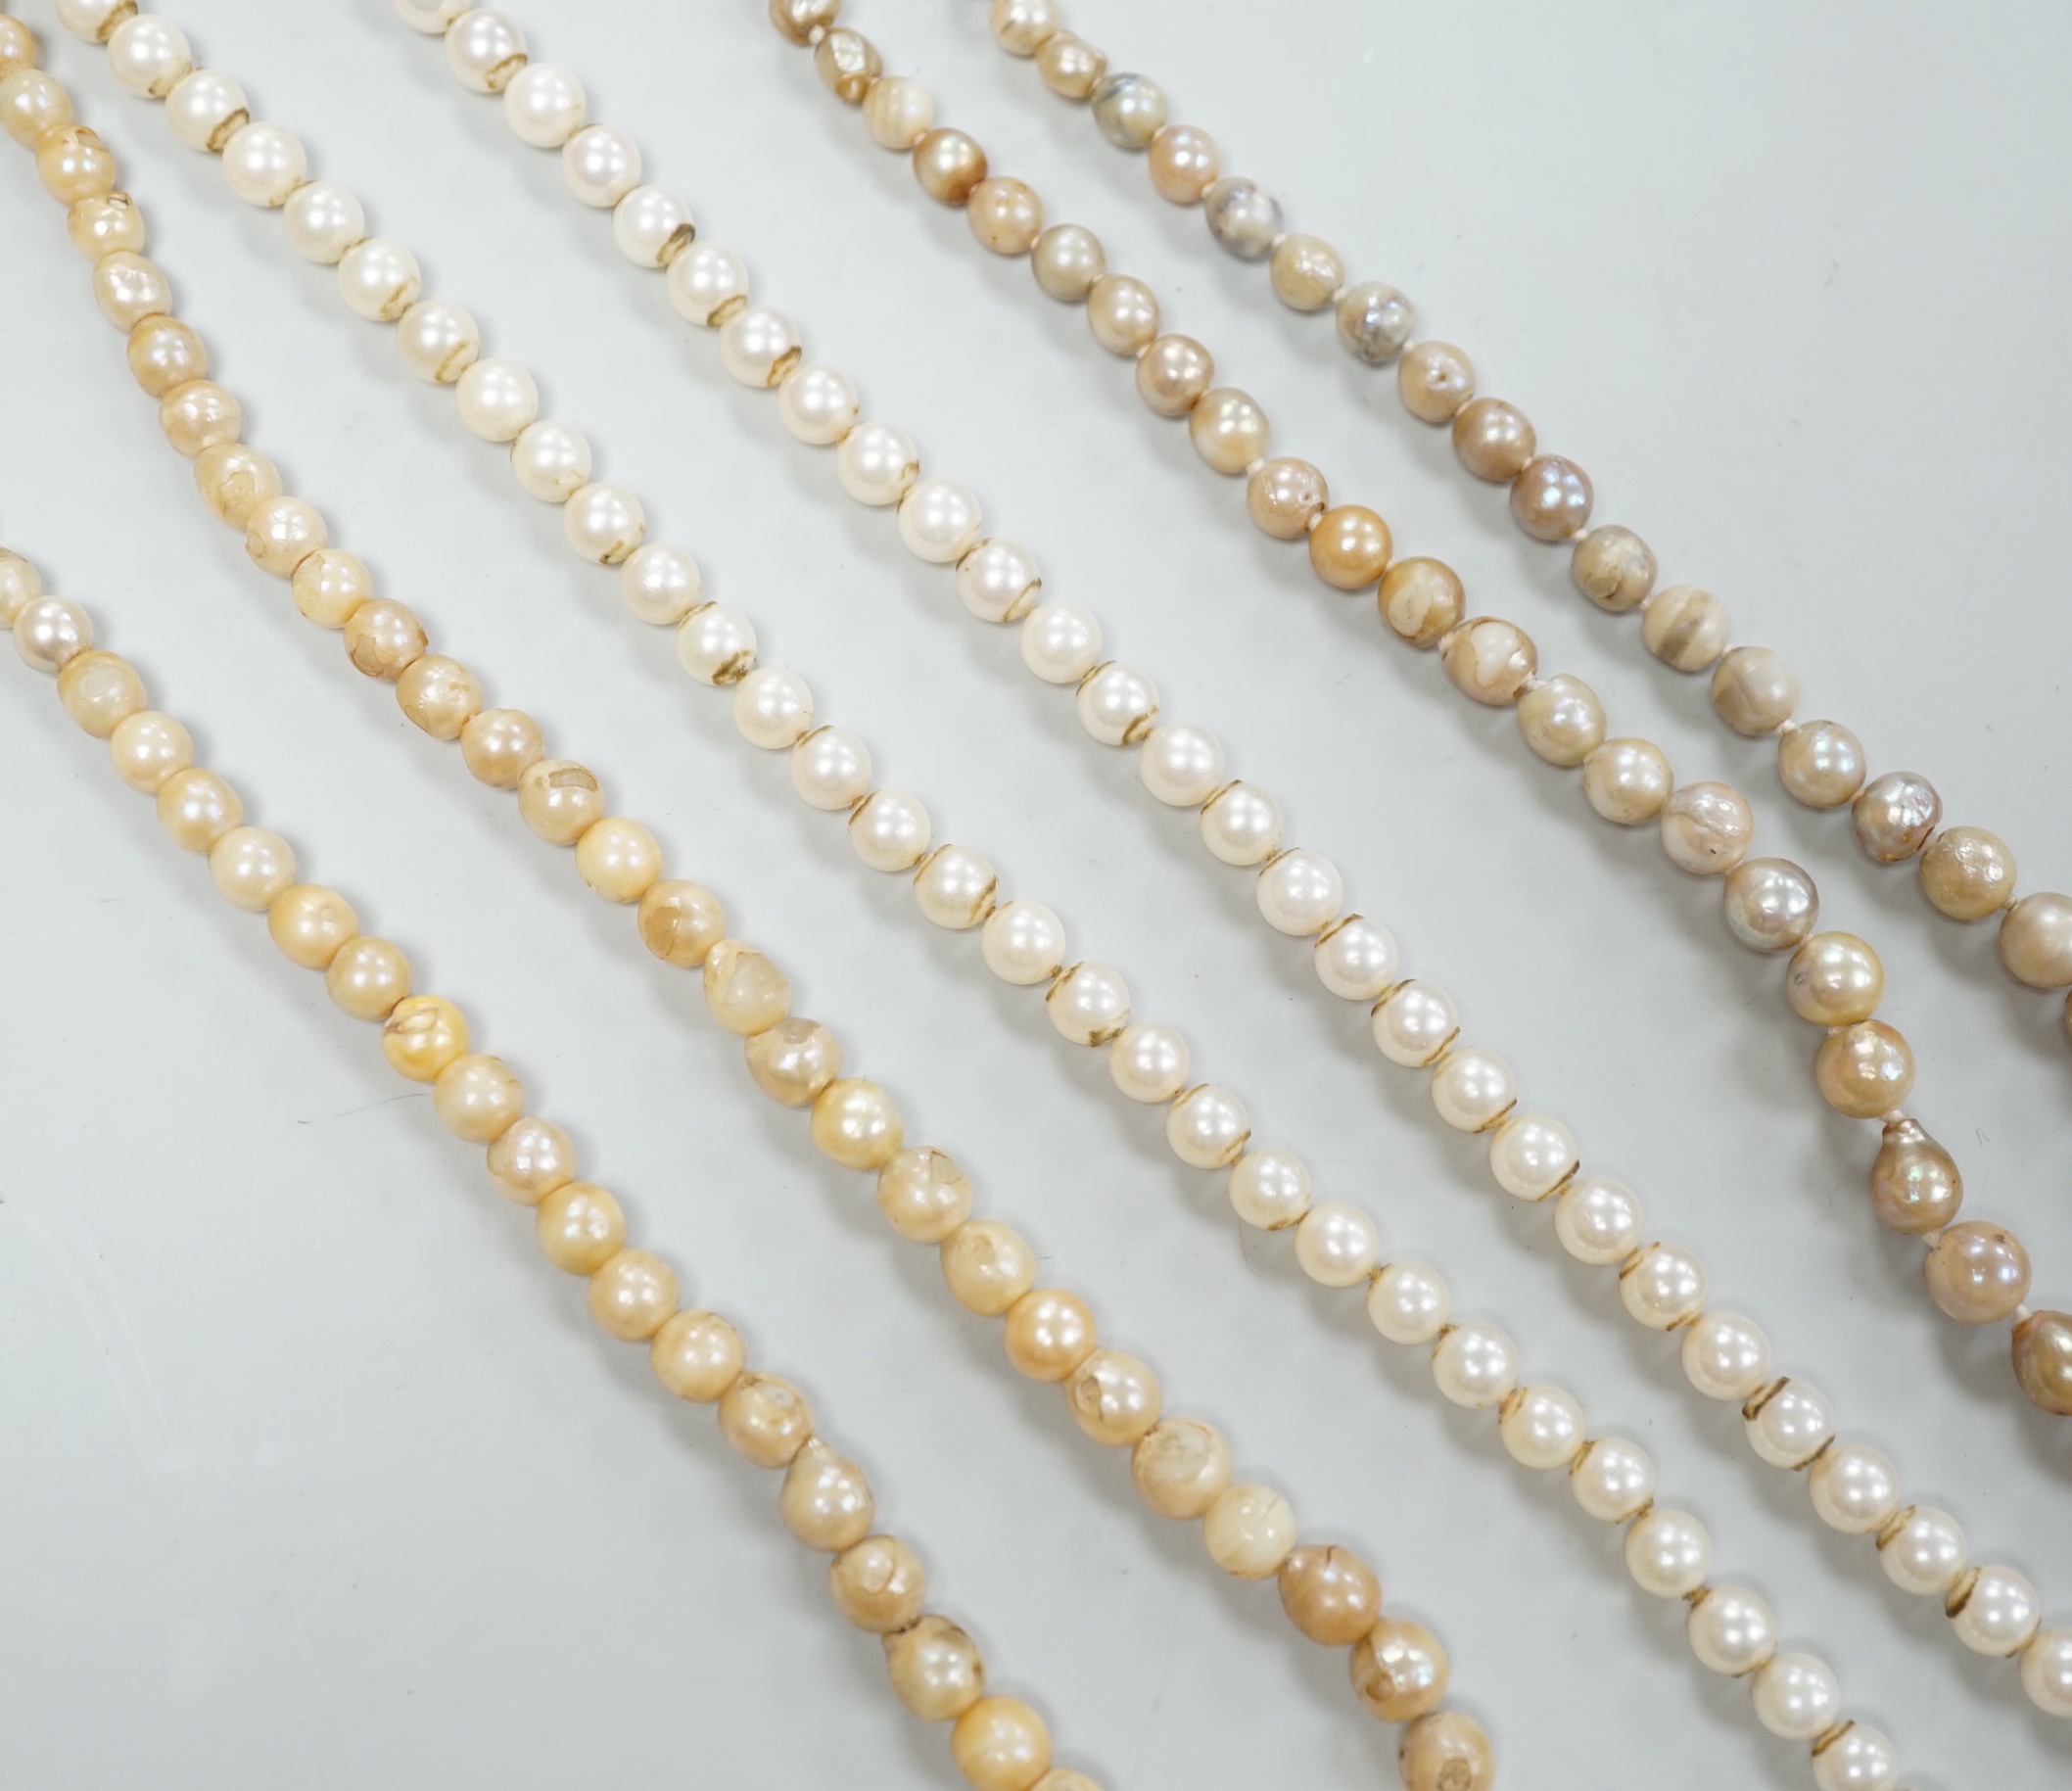 Three assorted single strand cultured pearl necklaces, longest 58cm.